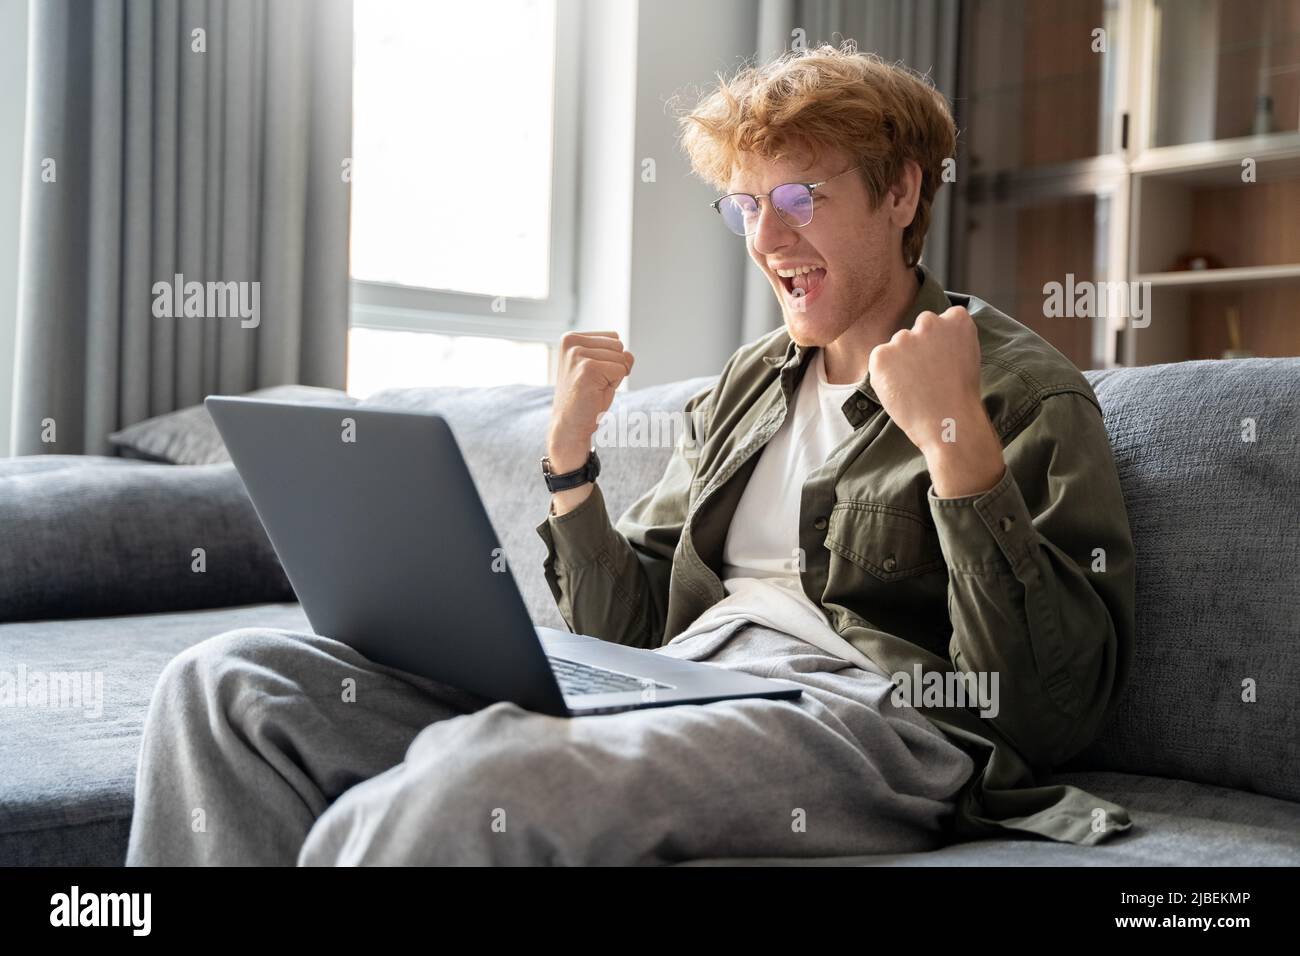 Excited young ginger man freelancer feeling winner having success at online work Stock Photo